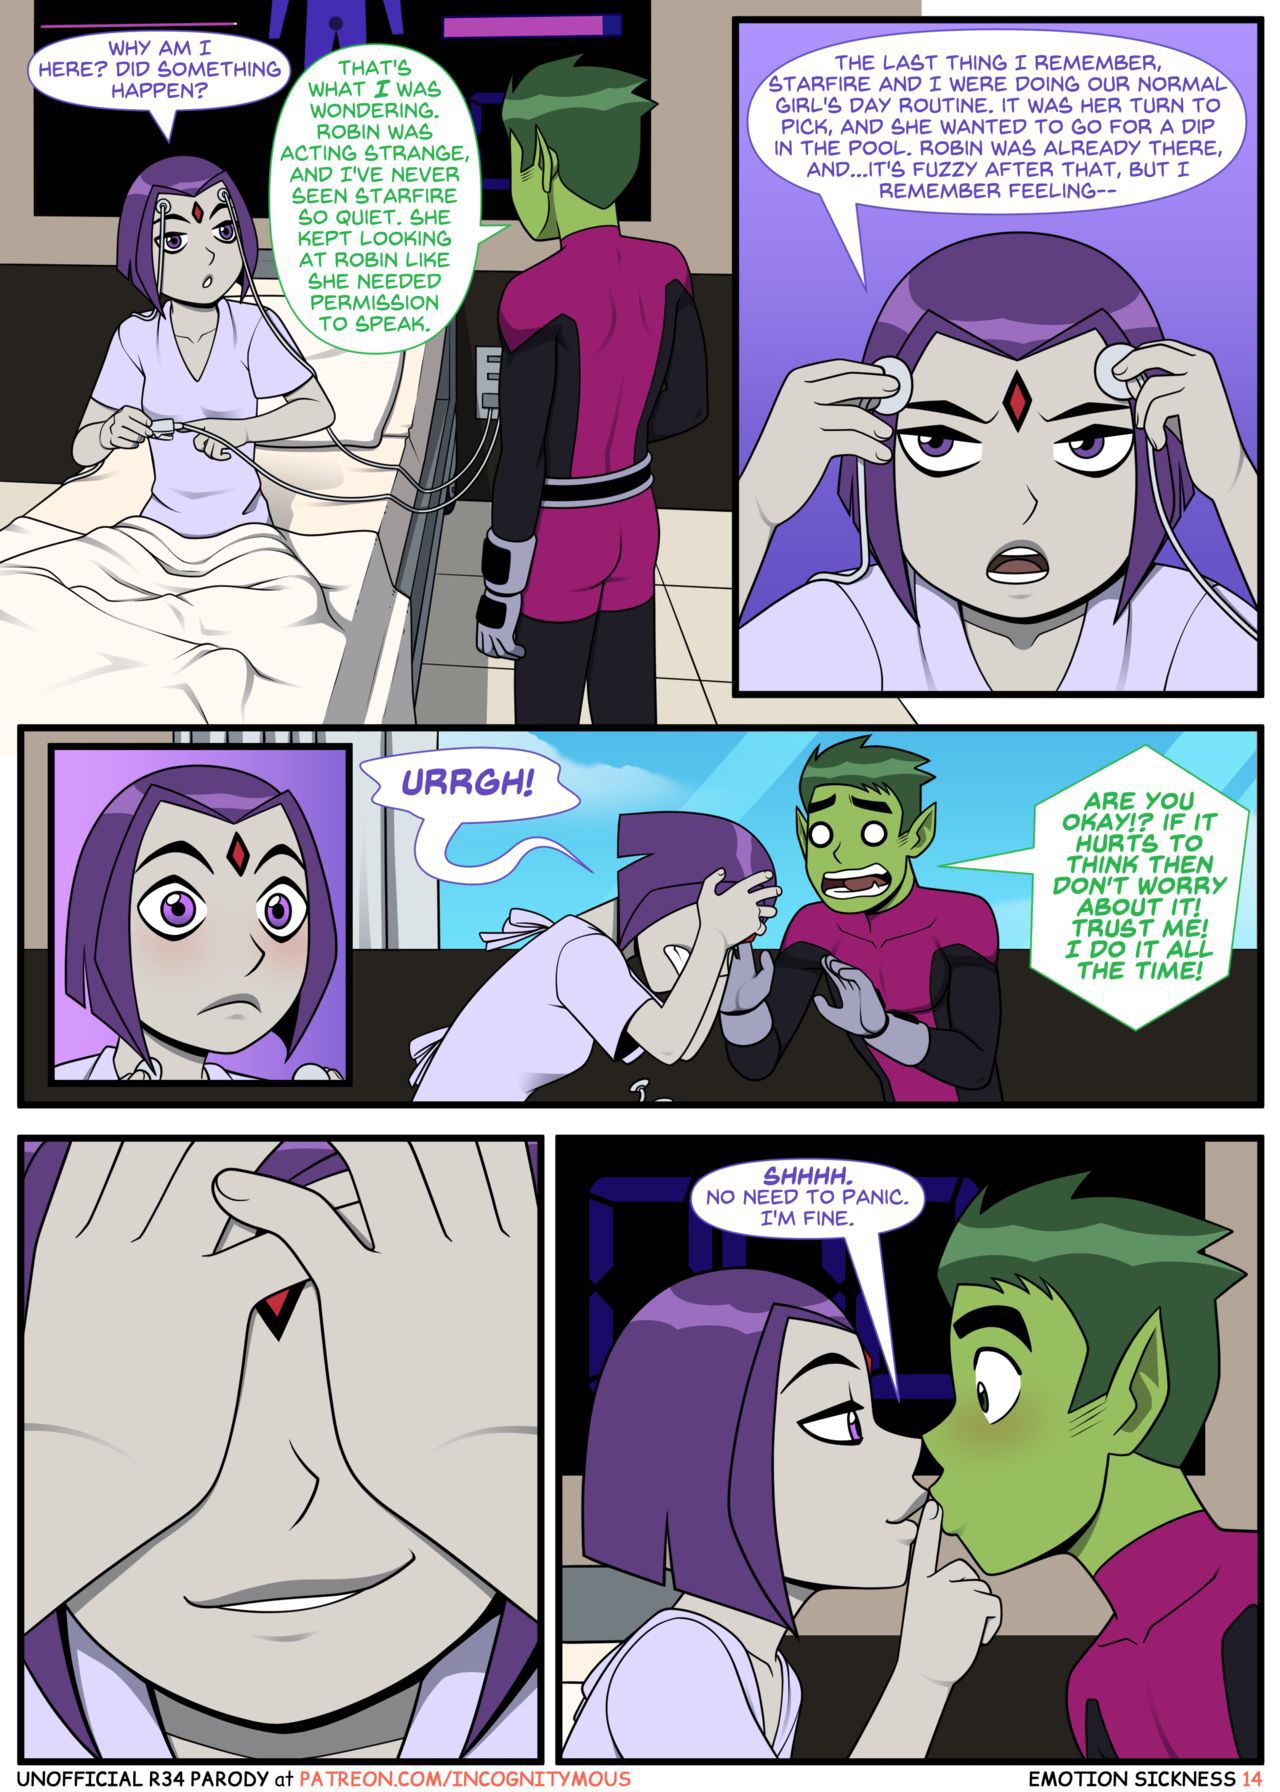 (Incognitymous) Teen Titans - Emotion Sickness(Complete) 14